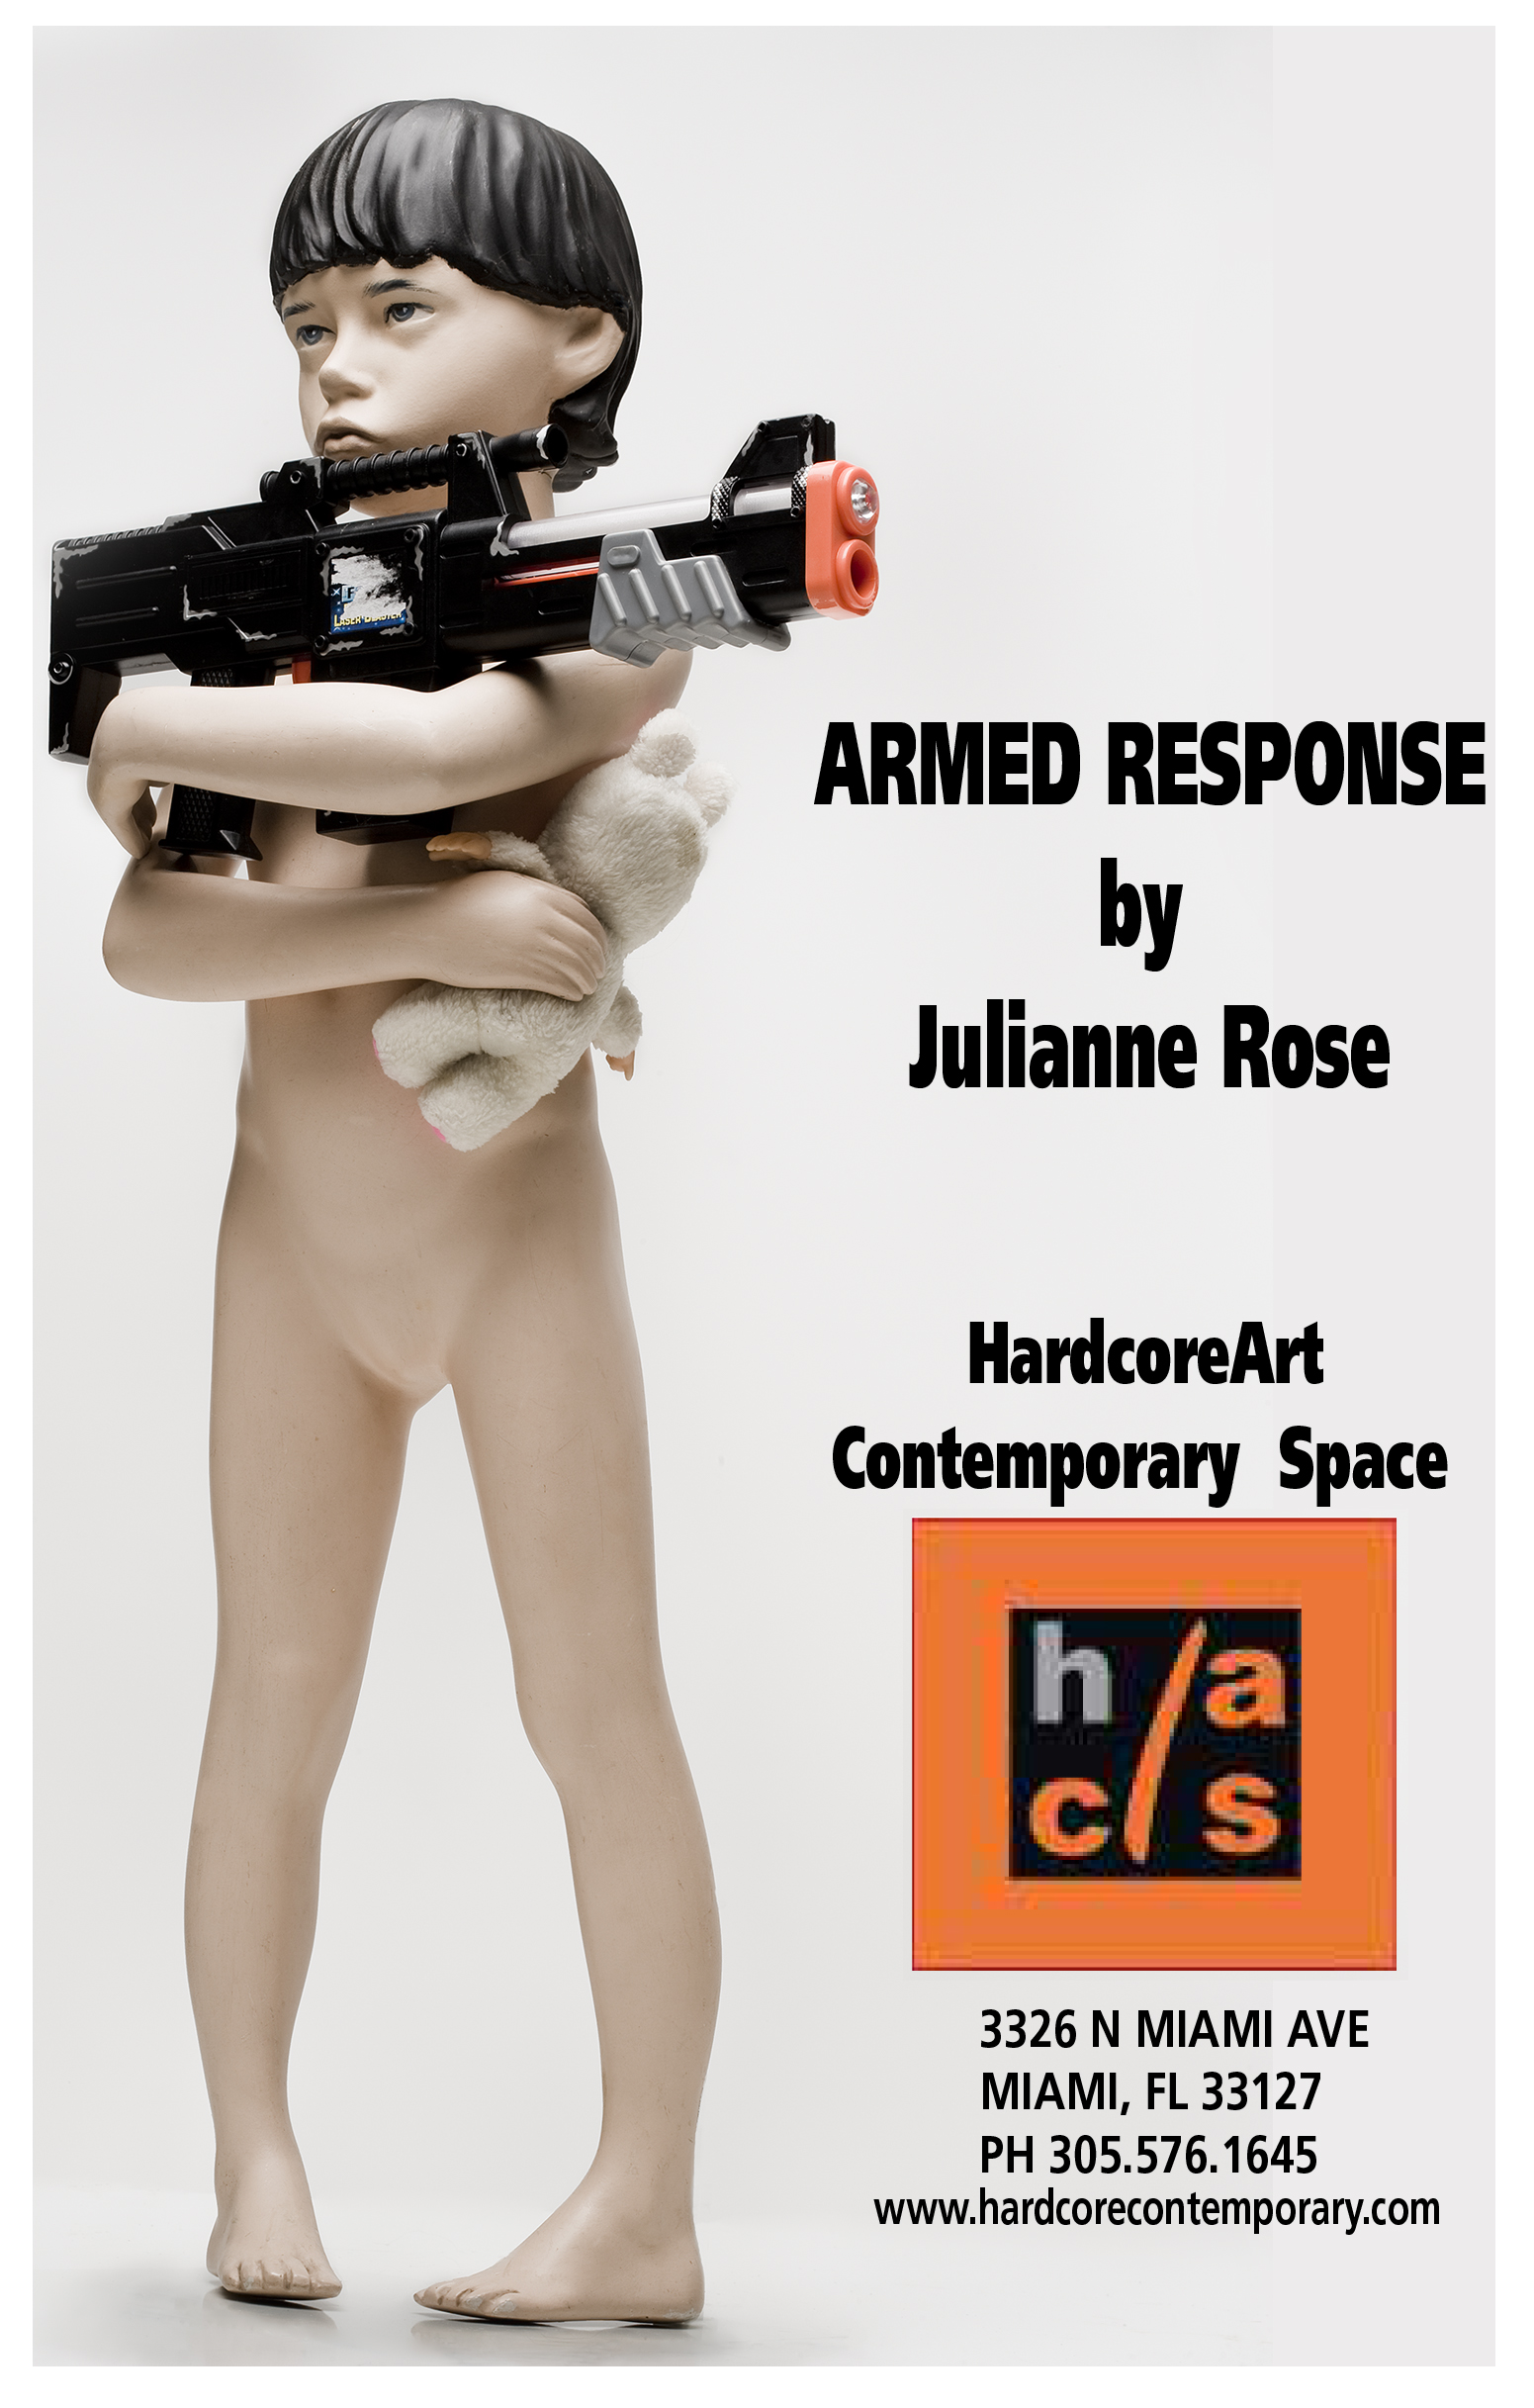 ARMED RESPONSE CATALOGUE by artist Julianne Rose